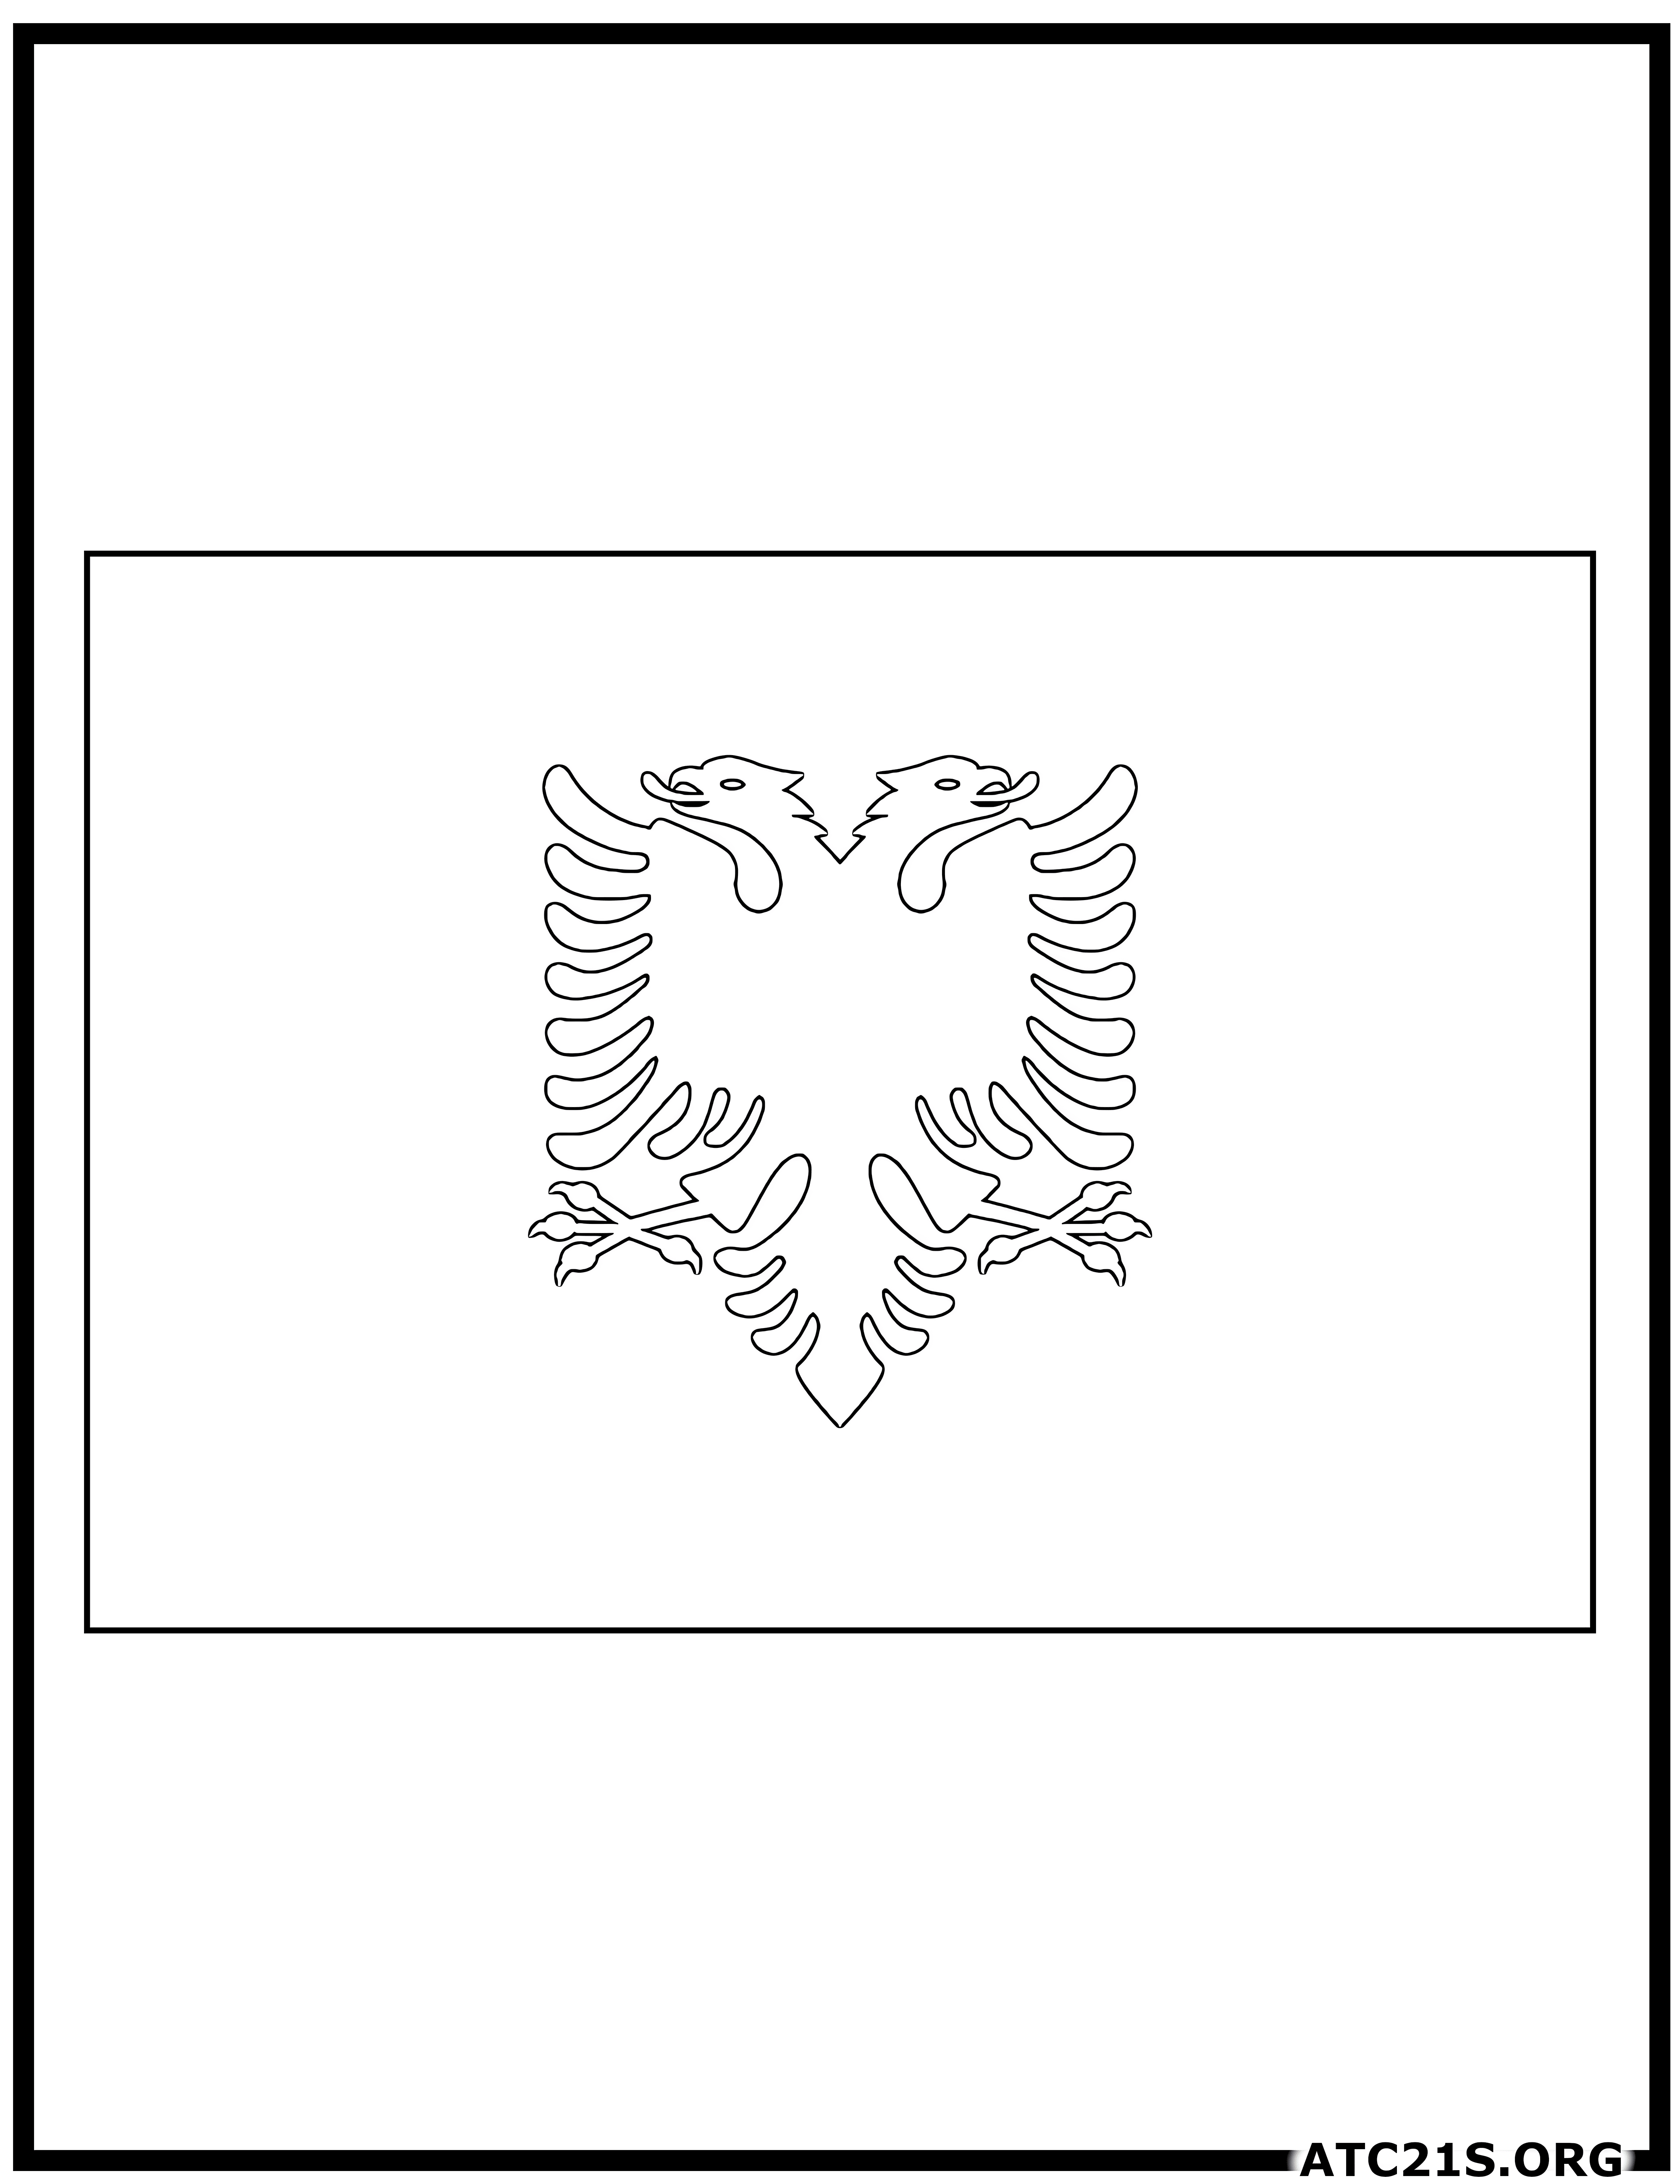 Albania_flag_coloring_page